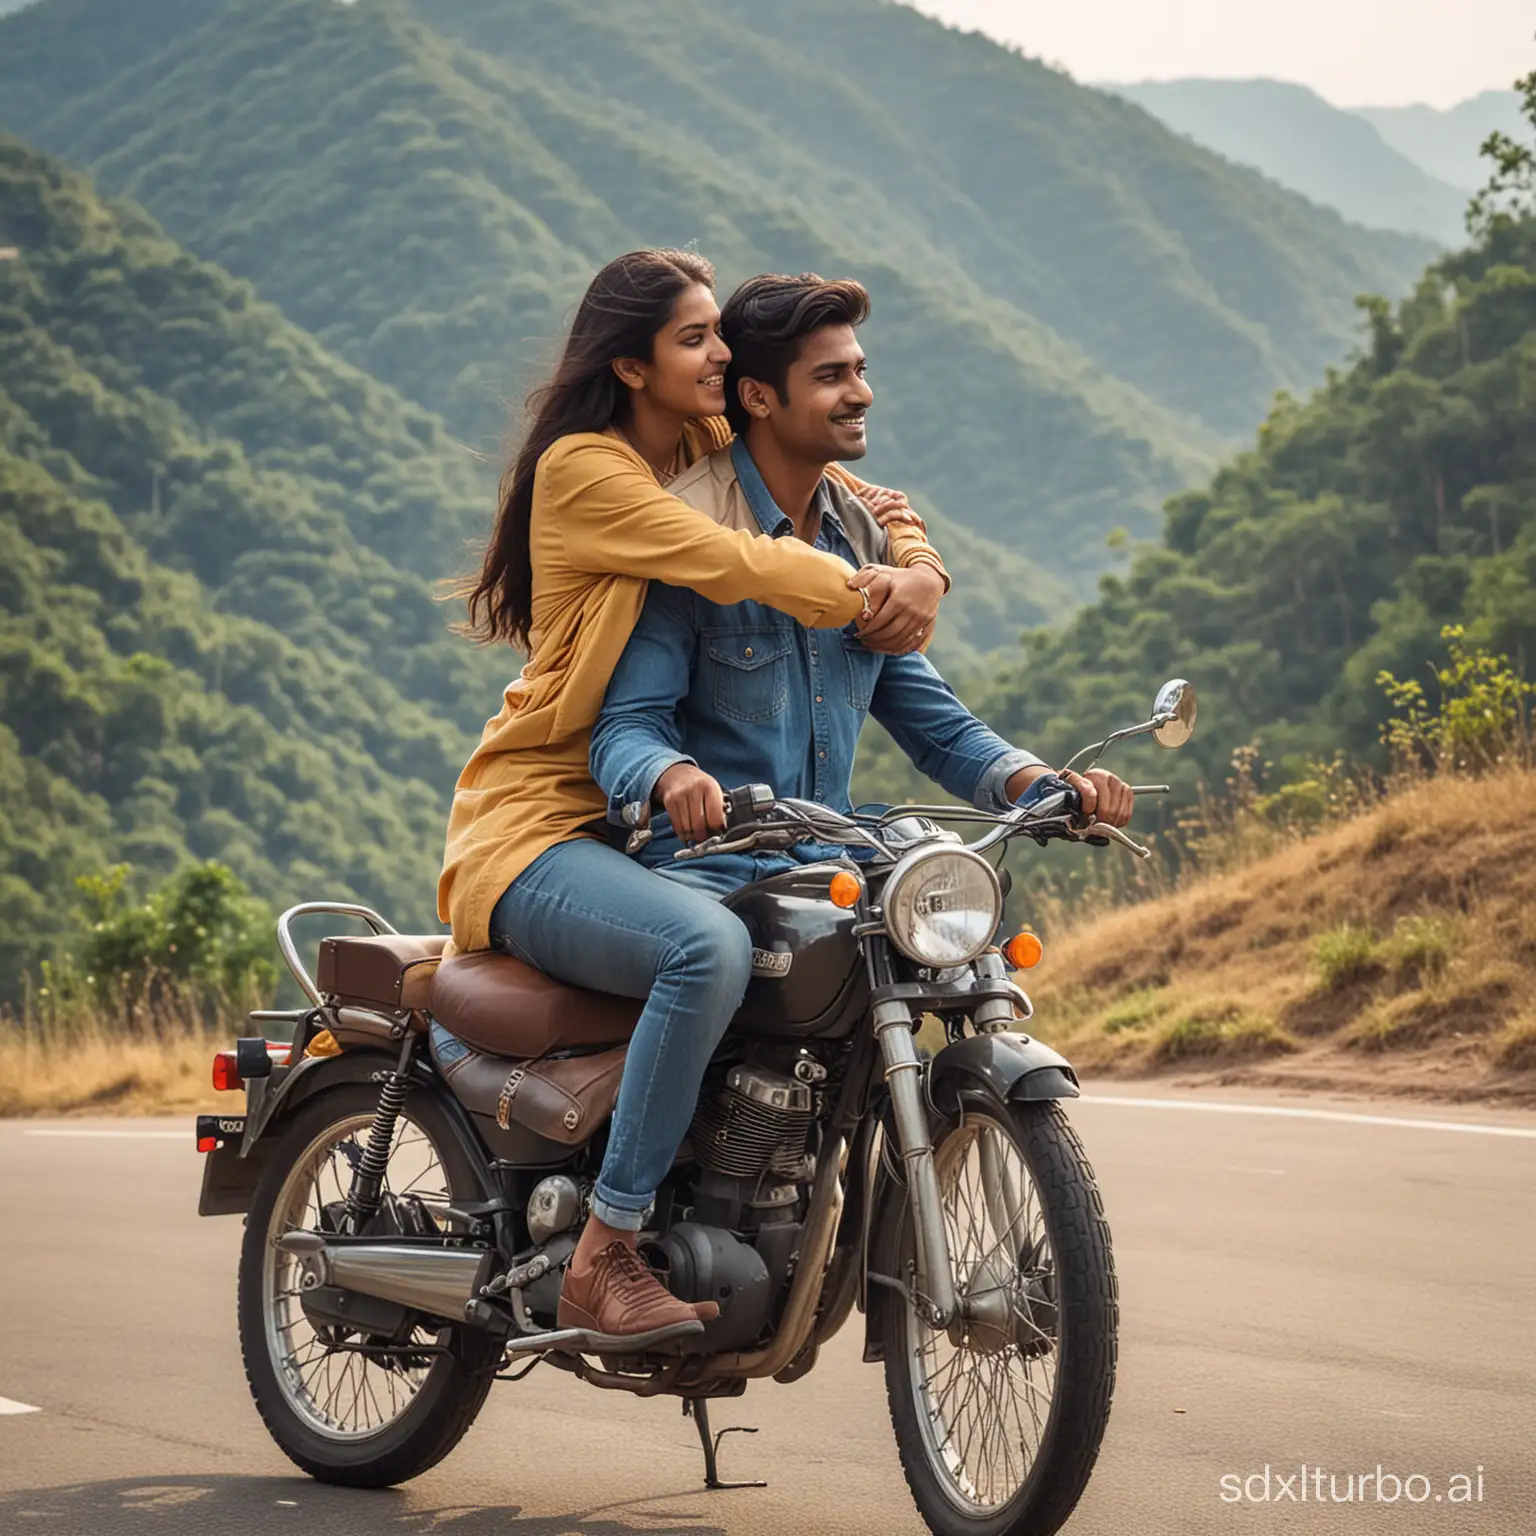 Indian-Couple-Riding-Motorcycle-Through-Hill-Station-Landscape